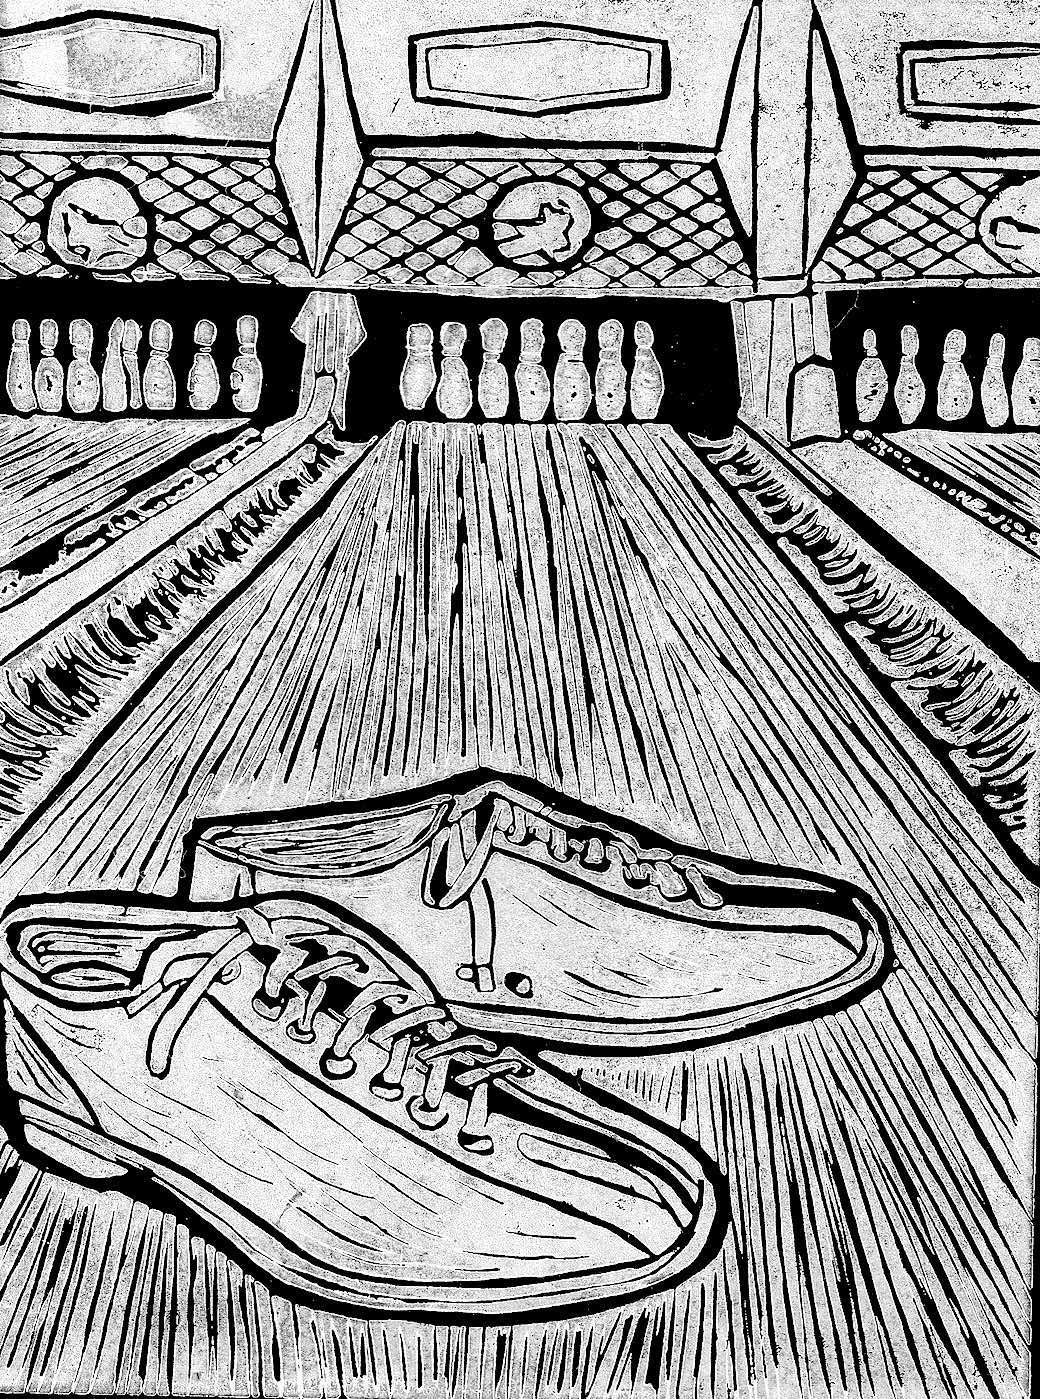 Block print of bowling shoes on a bowling lane by Charly Fasano.